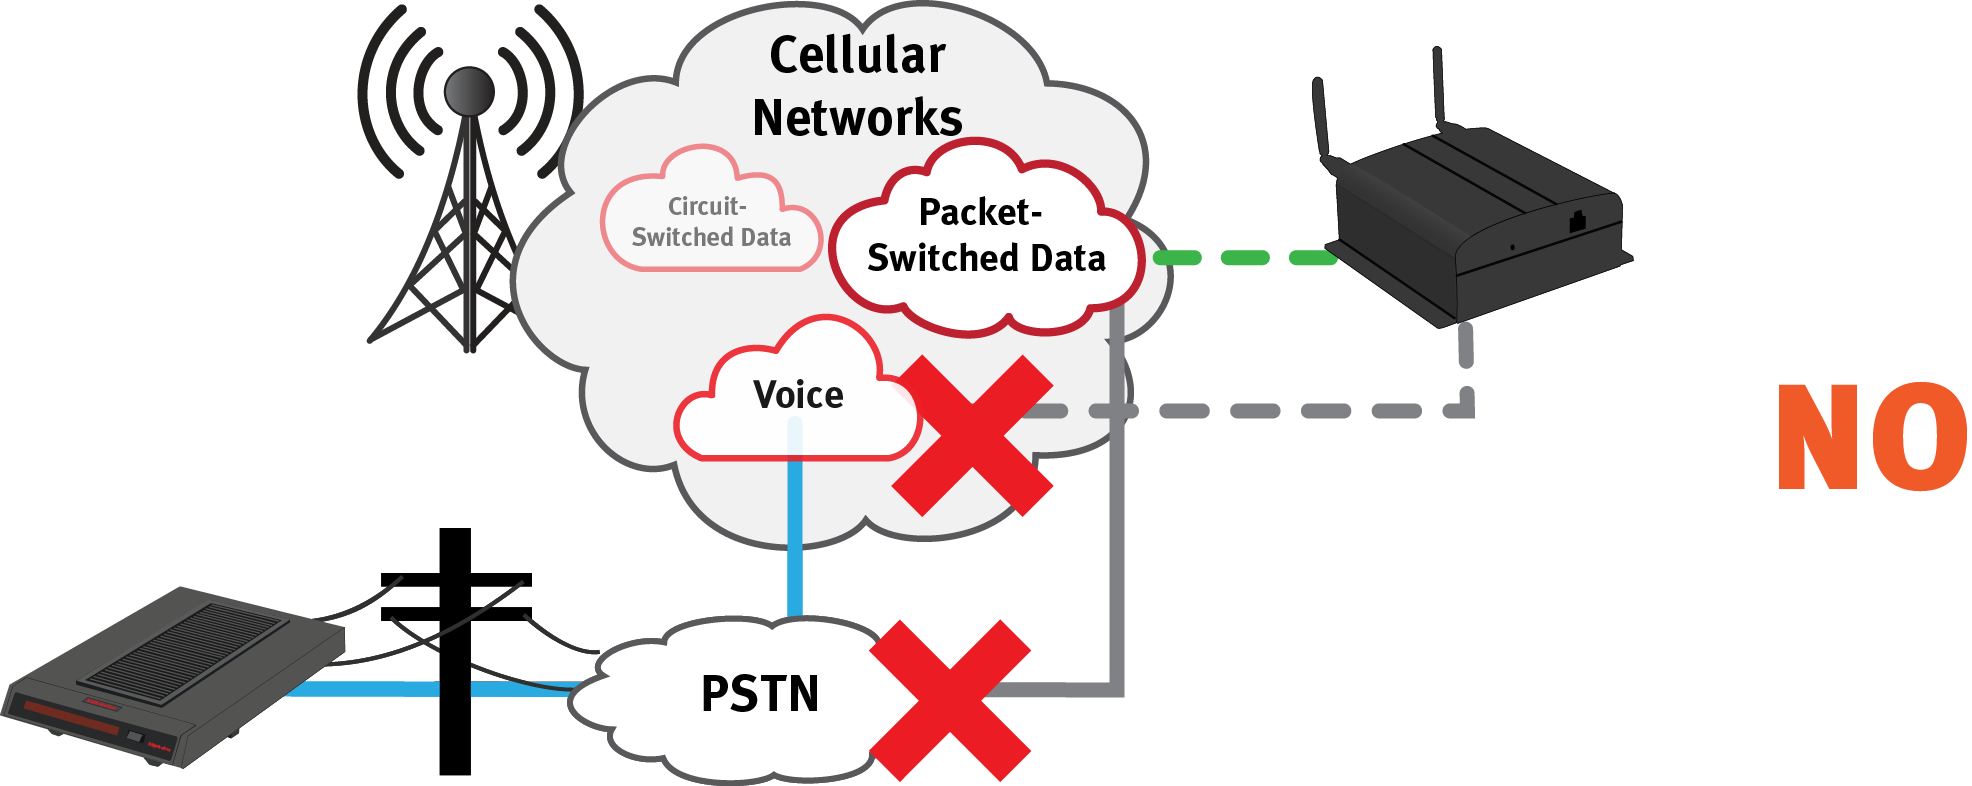 PSTN Voice Data Network does not work between land line modems and cellular modems